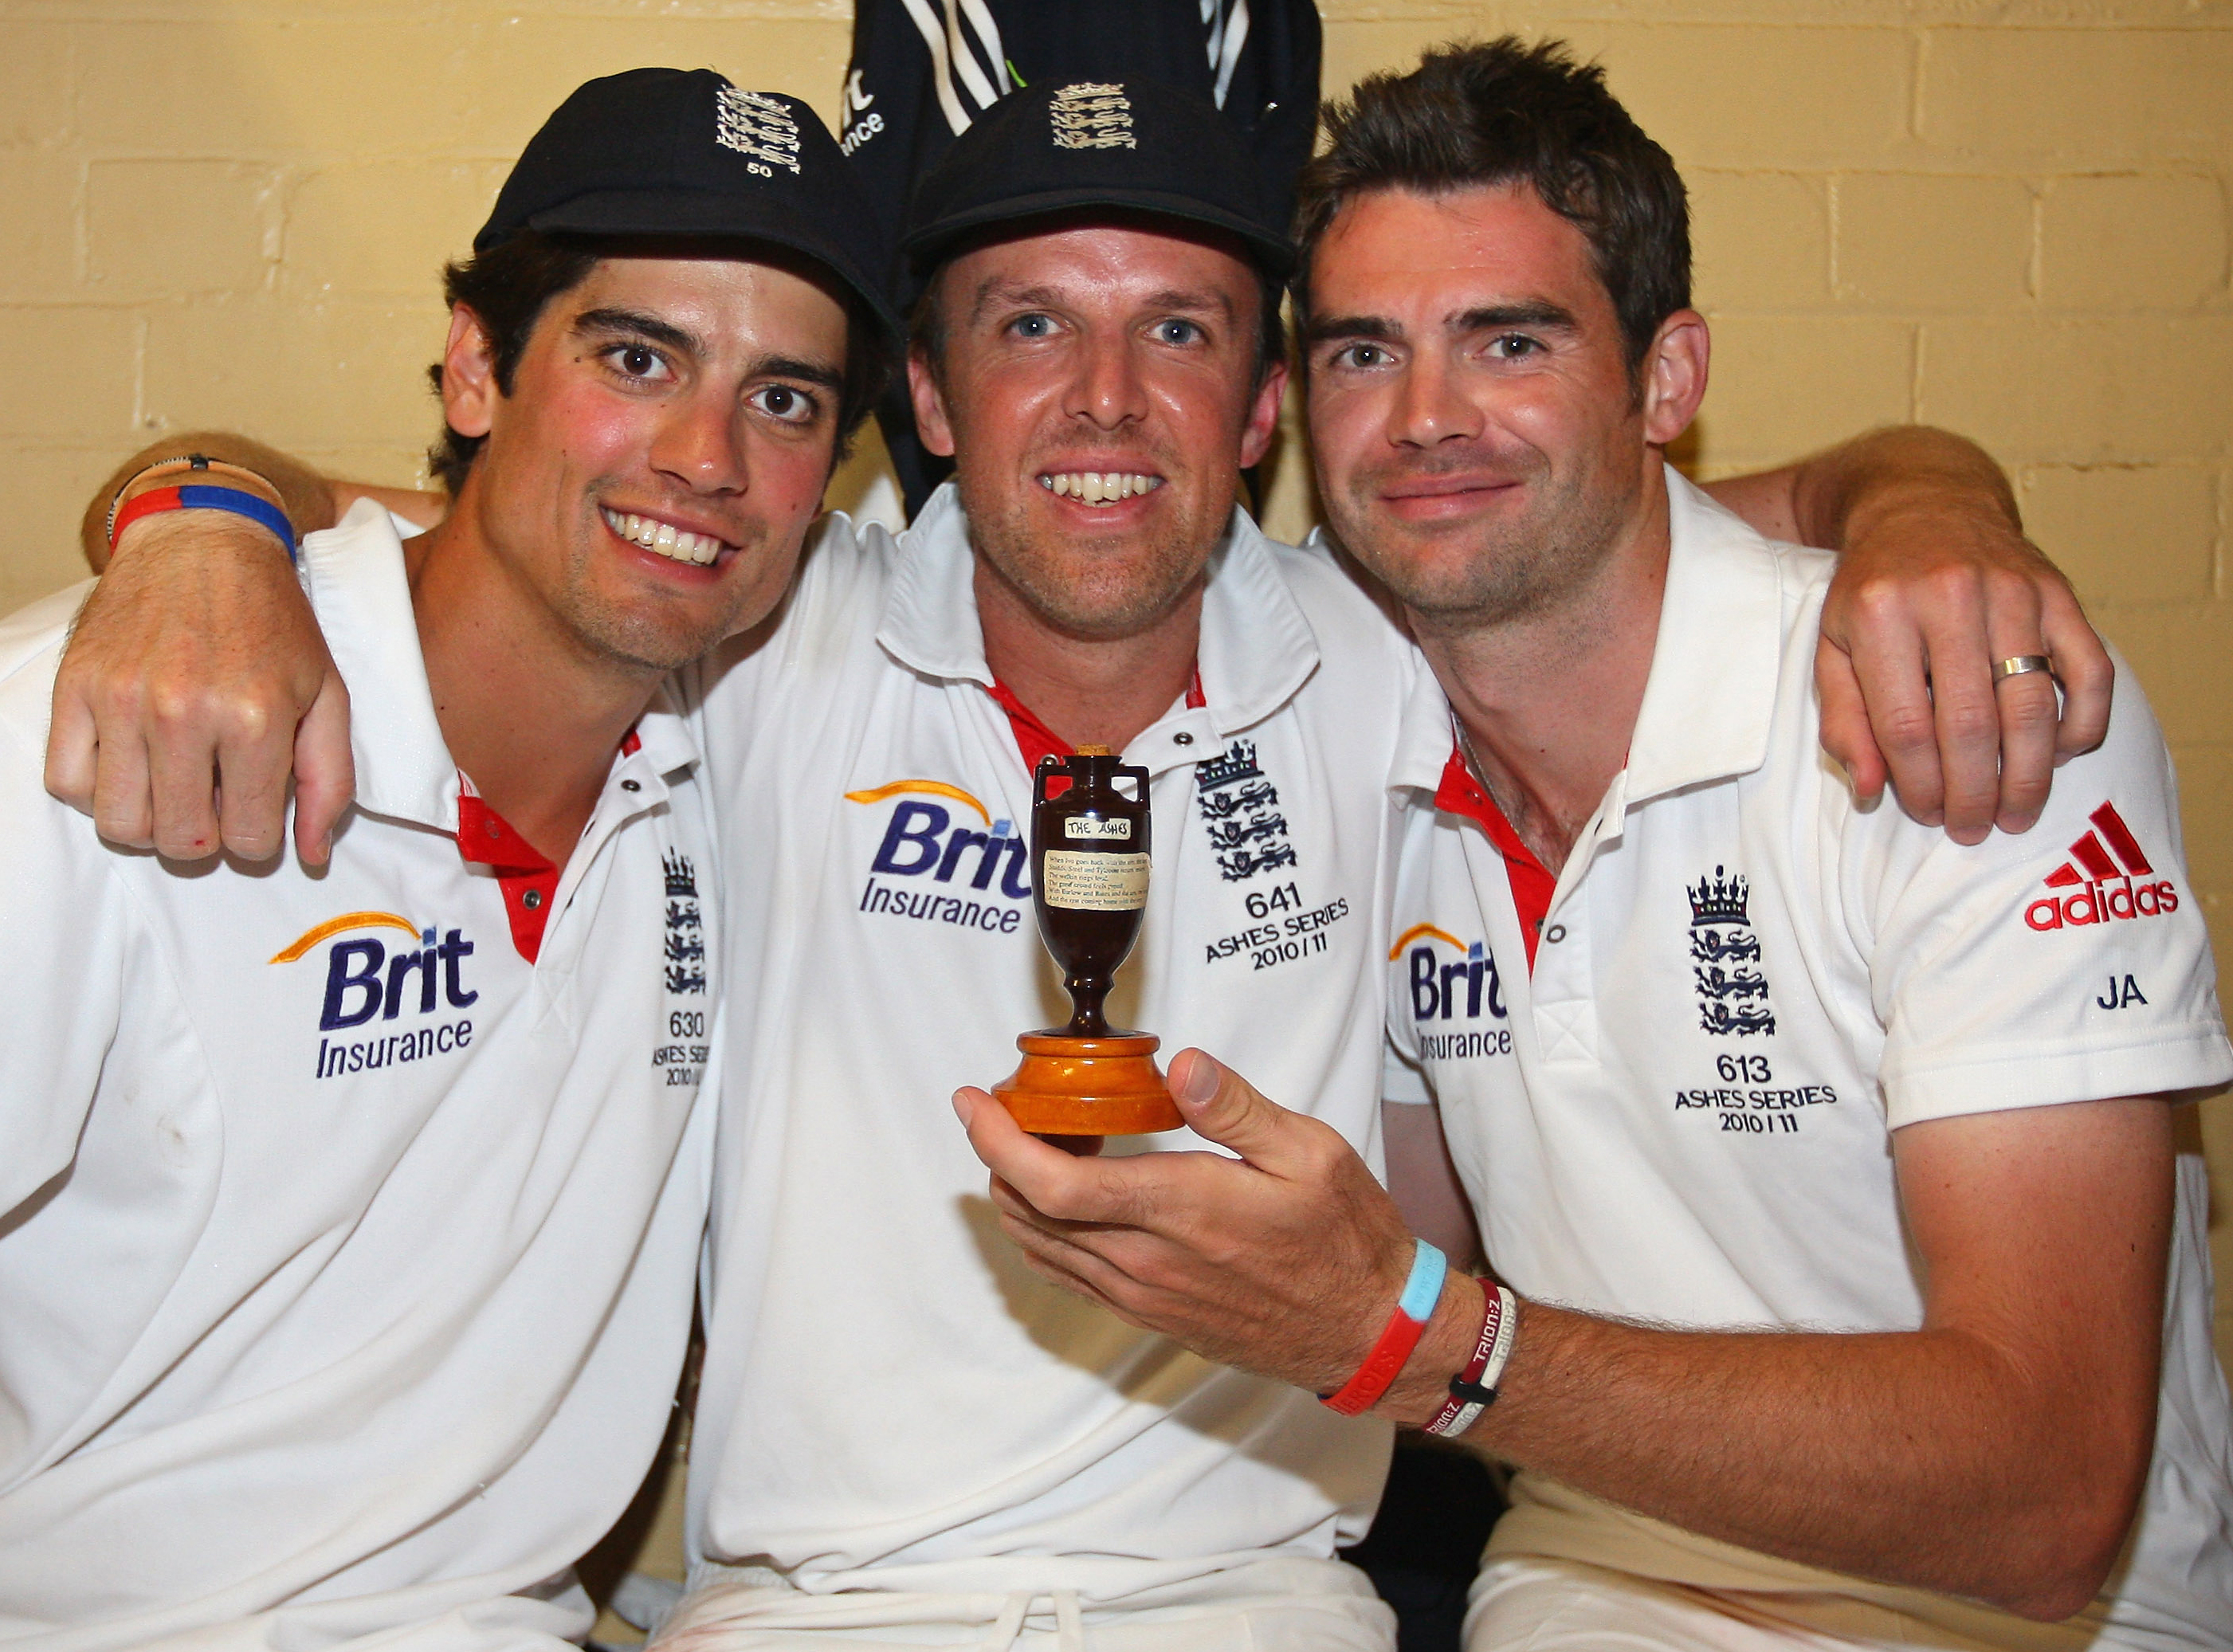 England cricketers Alastair Cook (L), Gr